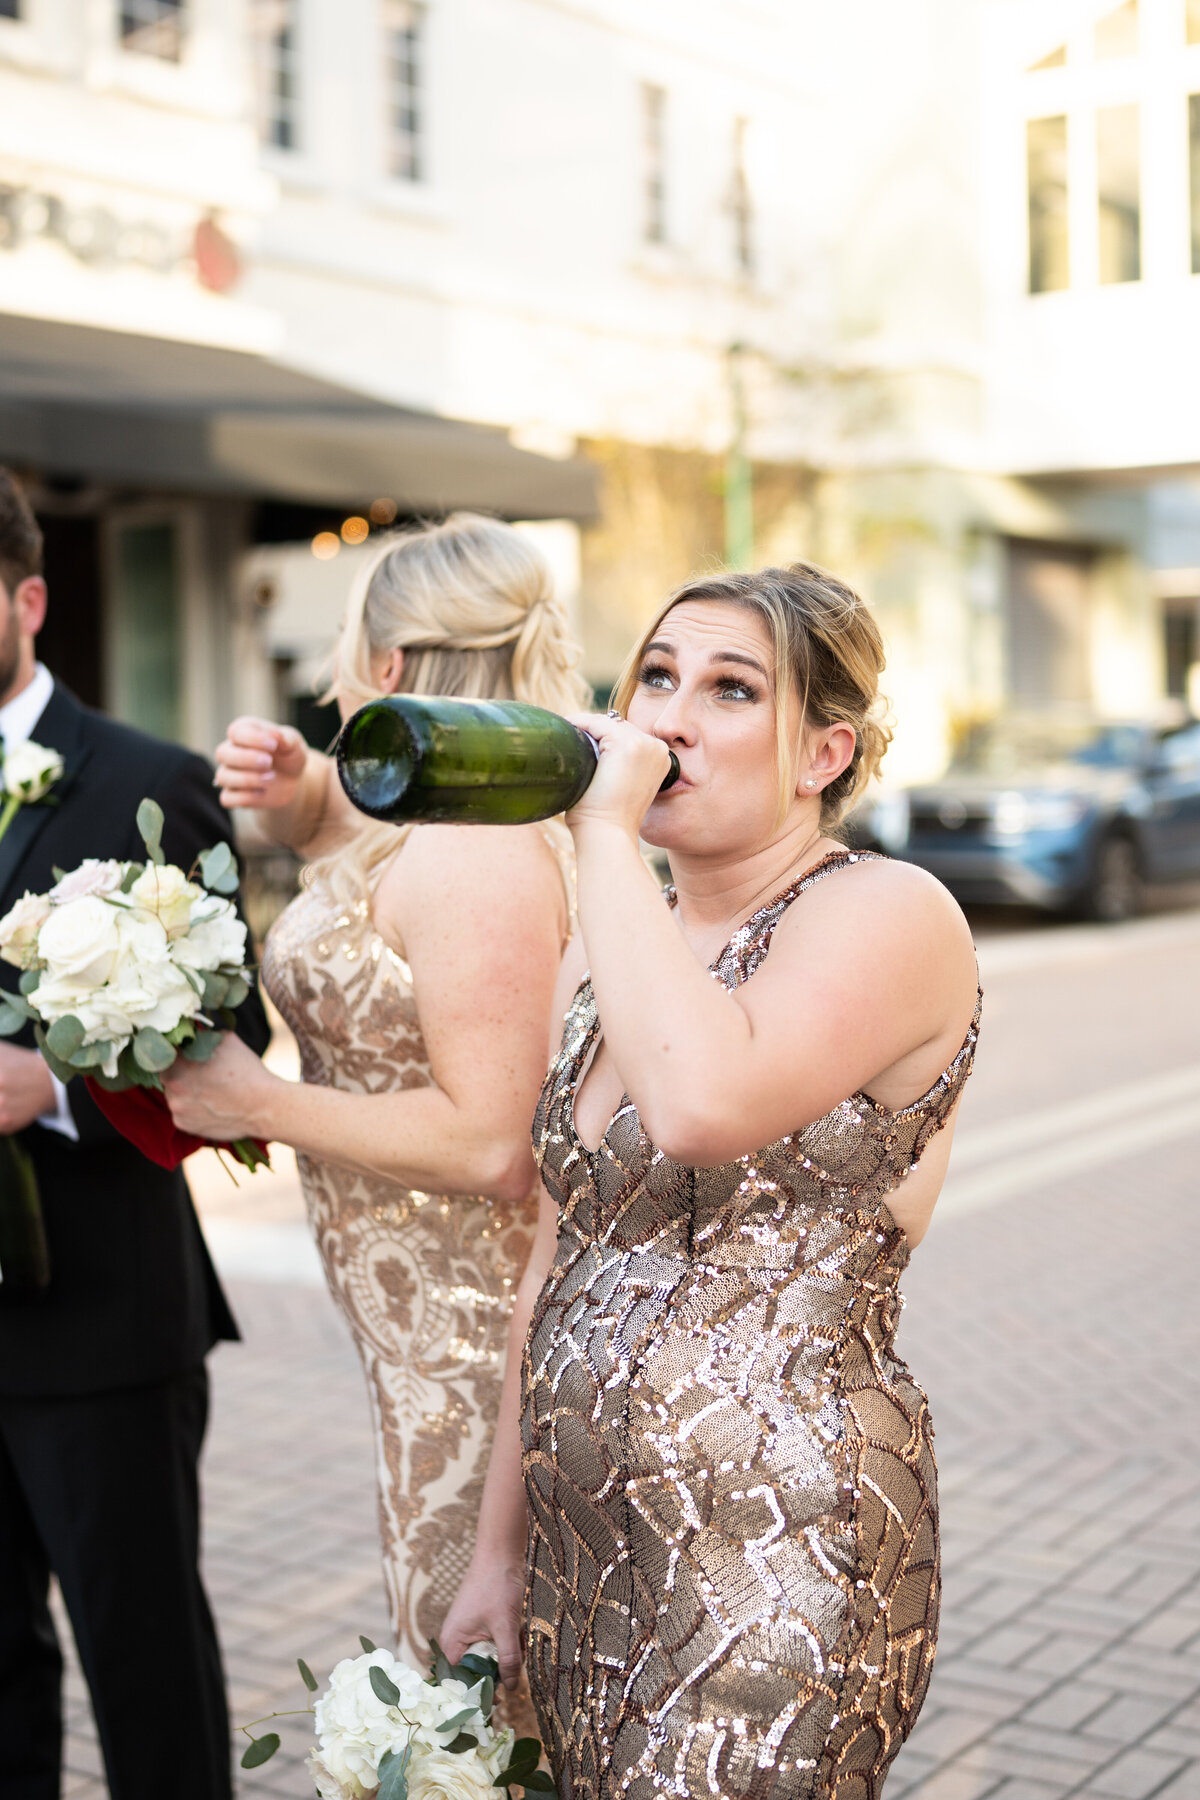 Bridesmaid drinking out of bottle